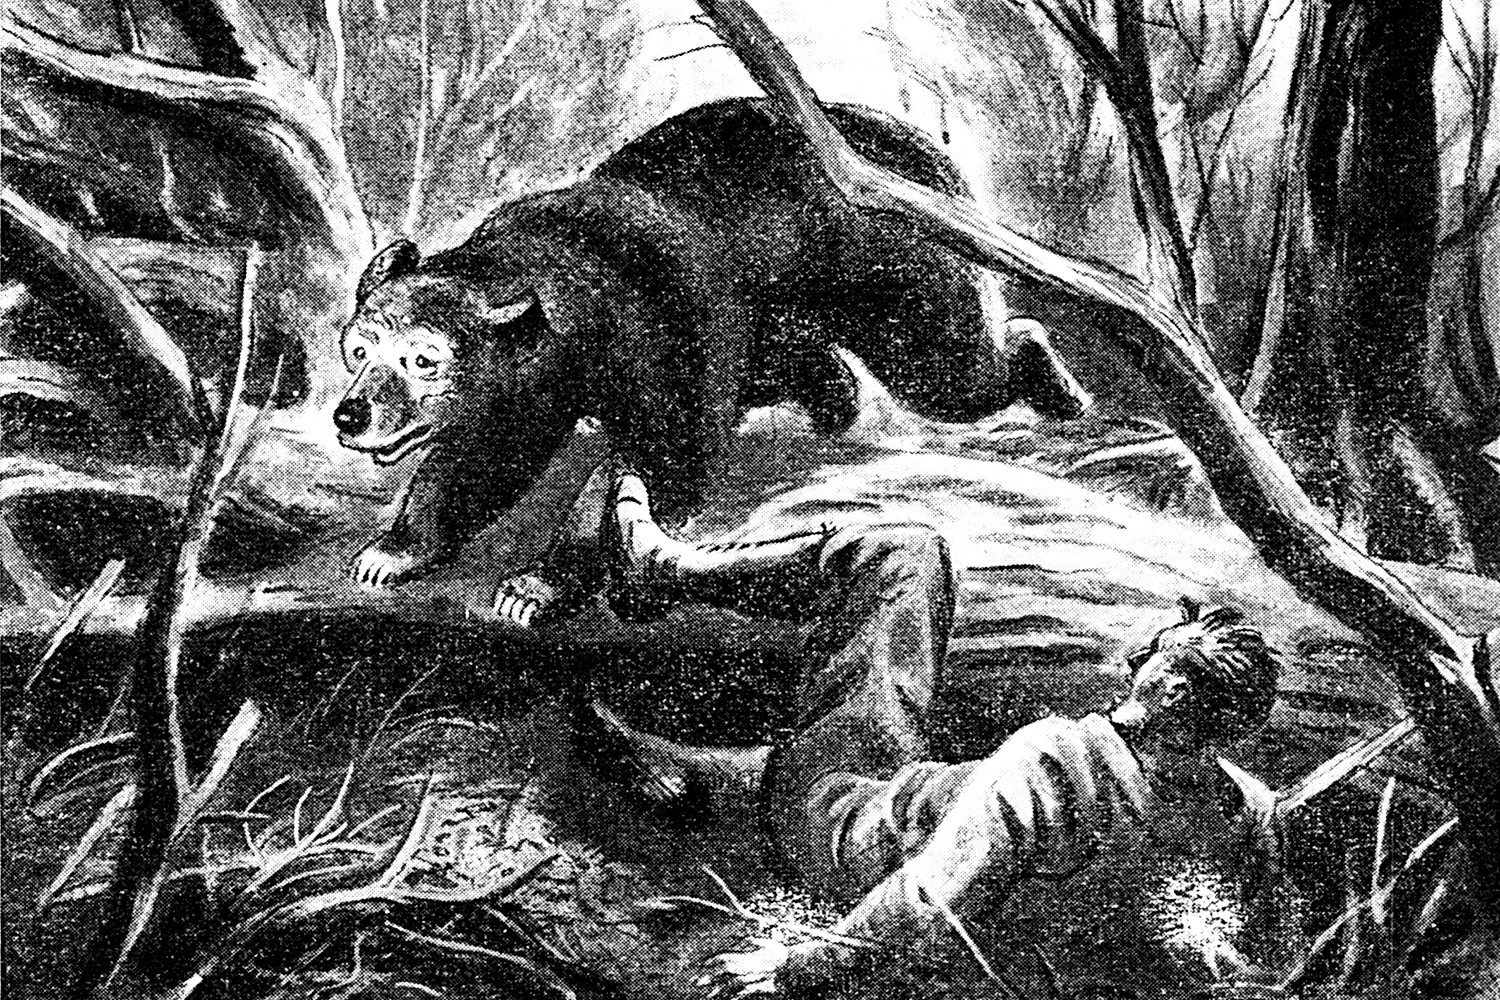 old illustration of bear and fallen man